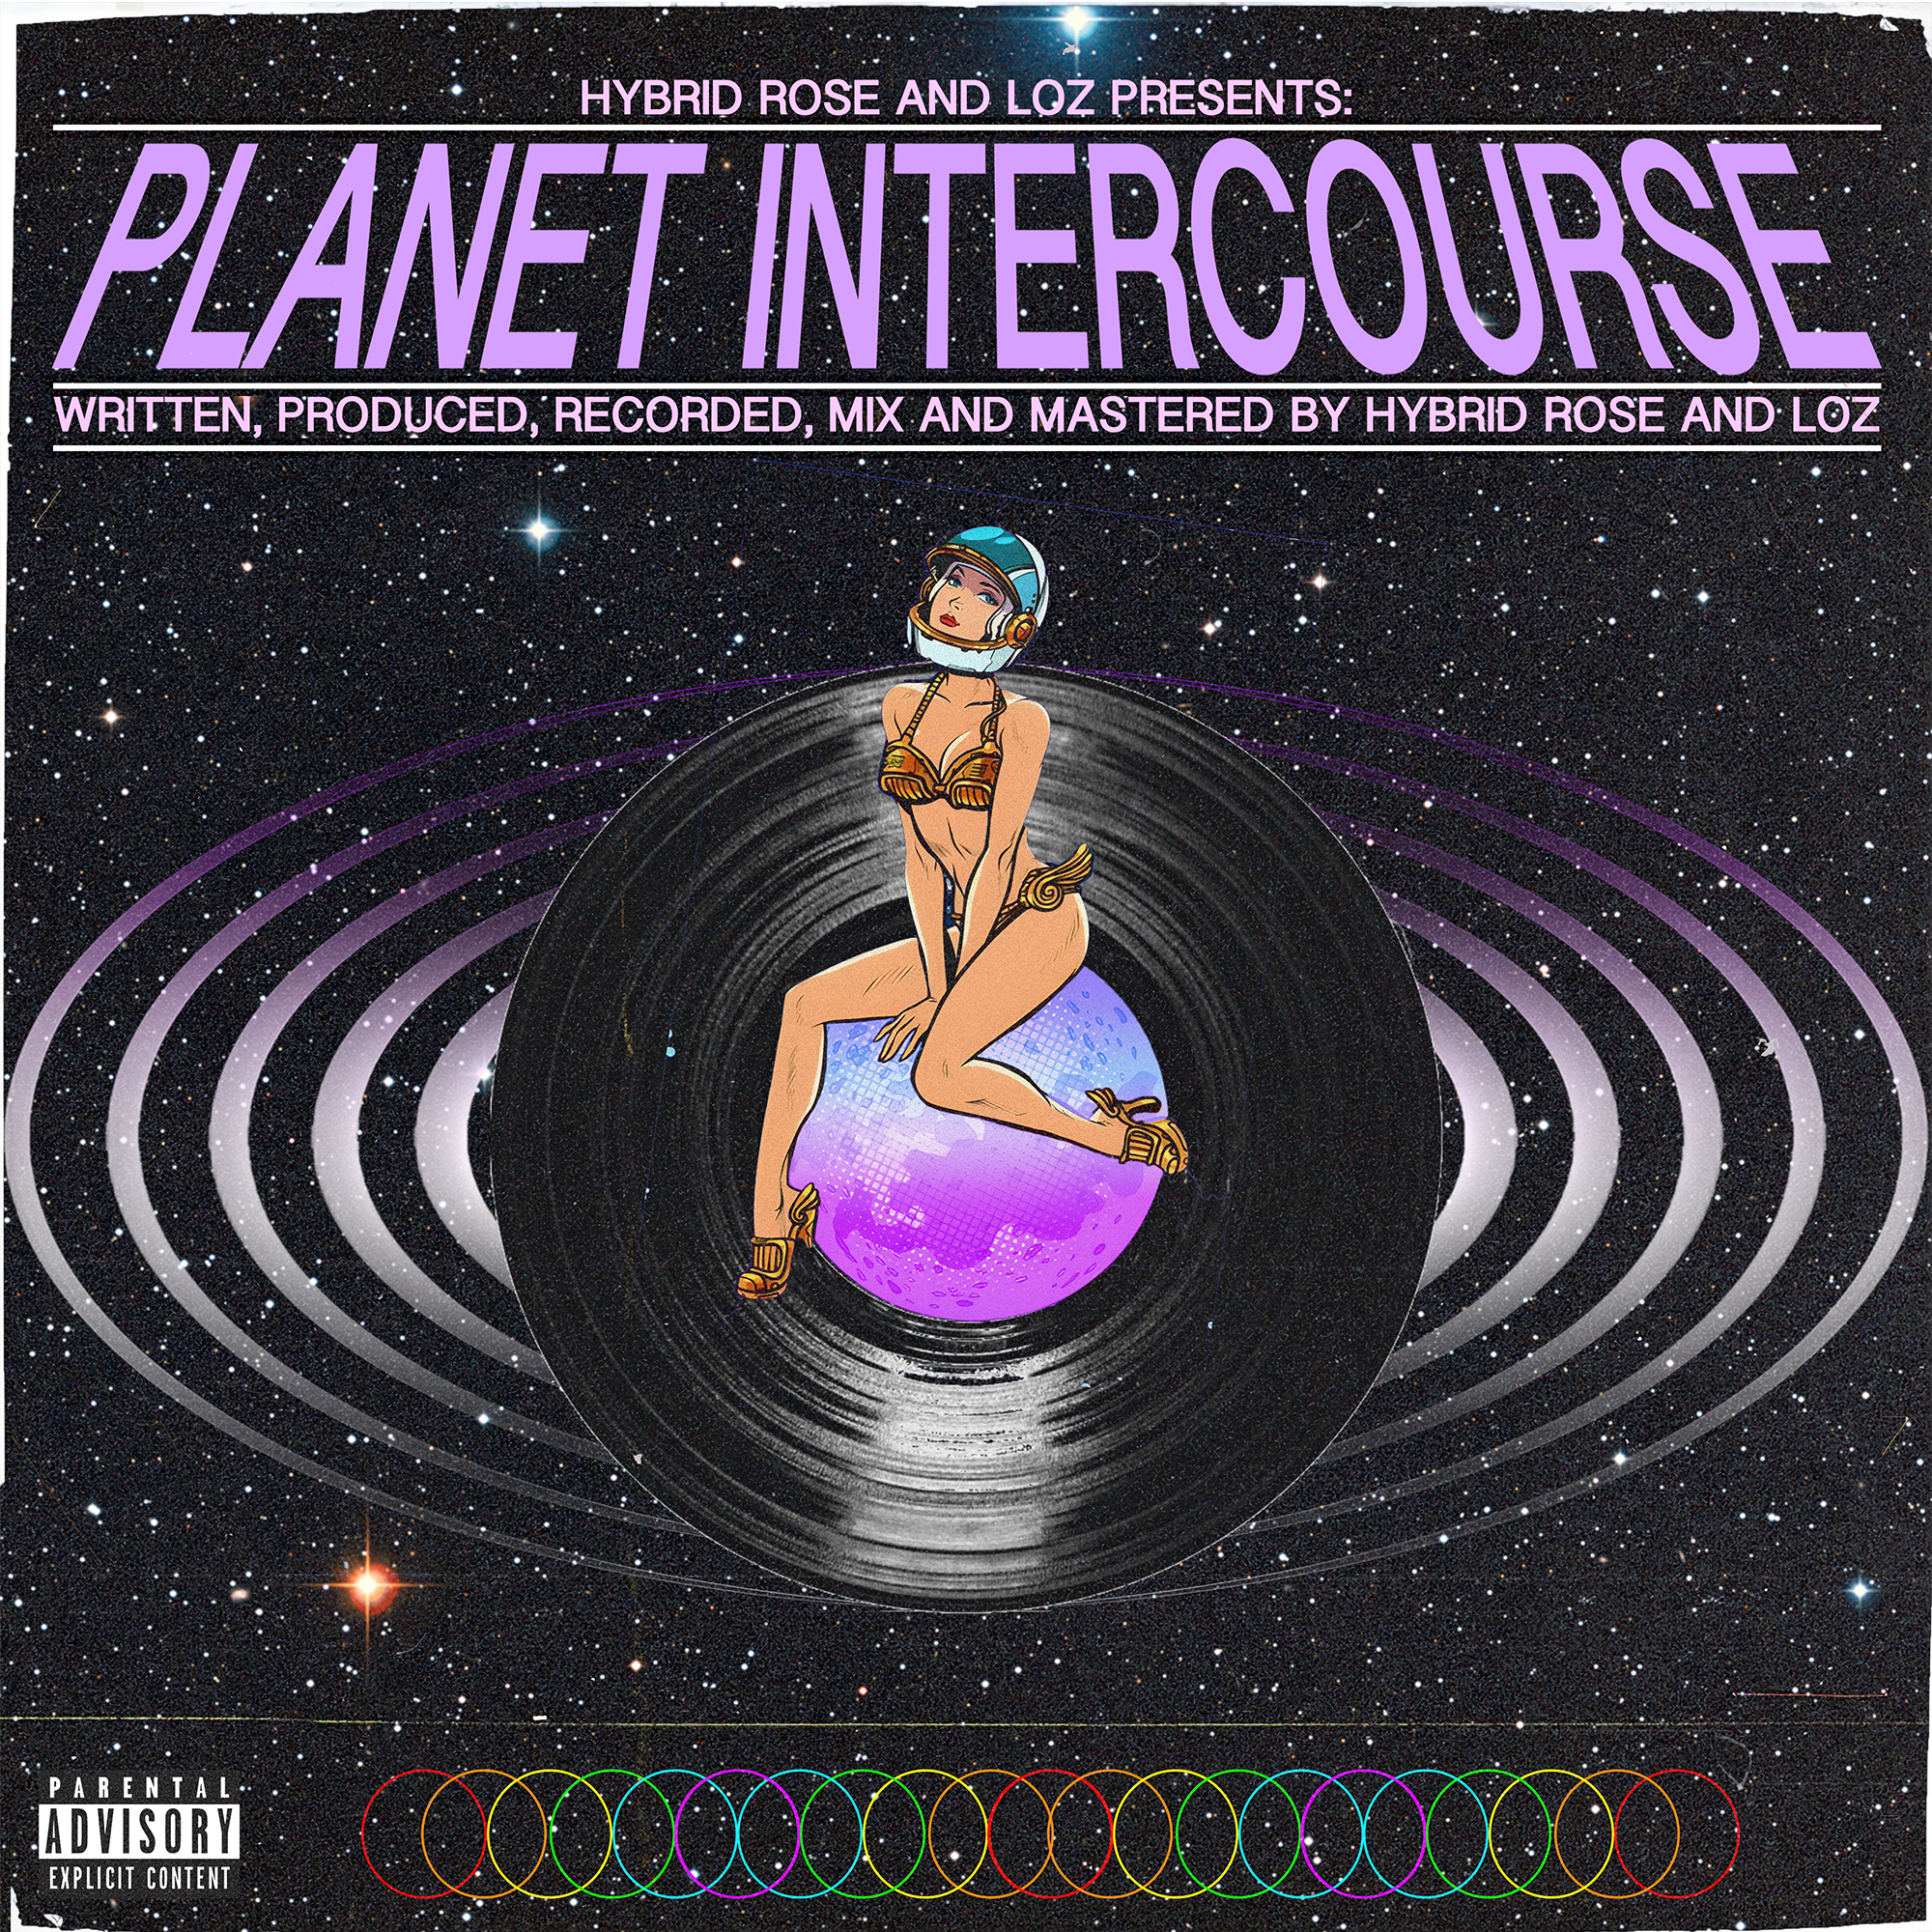 Charting an Interstellar Excursion to ‘Planet Intercourse‘ with Hybrid Rose.